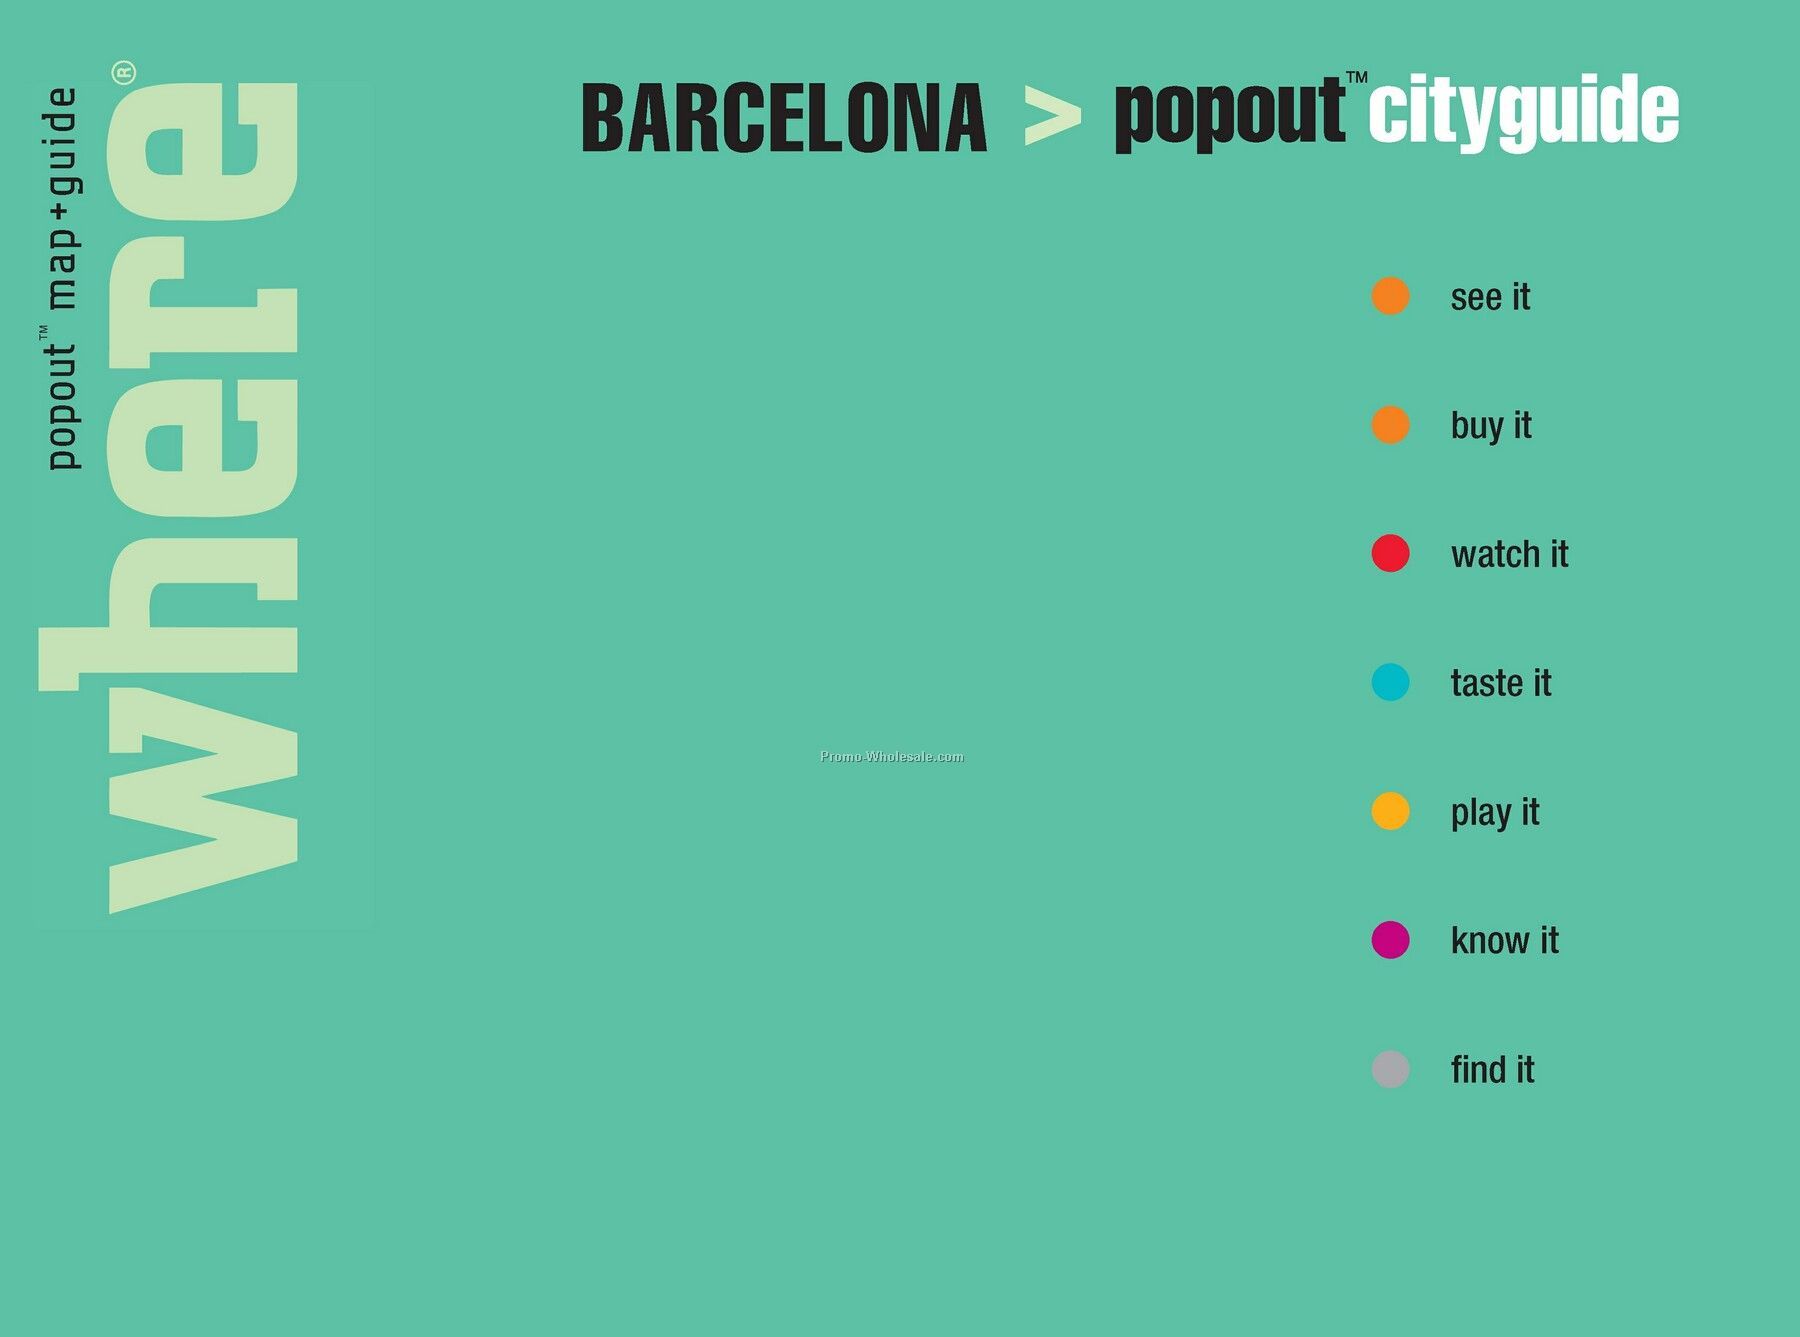 Travel Guides - International Guide Of Barcelona - Featuring Popout Maps